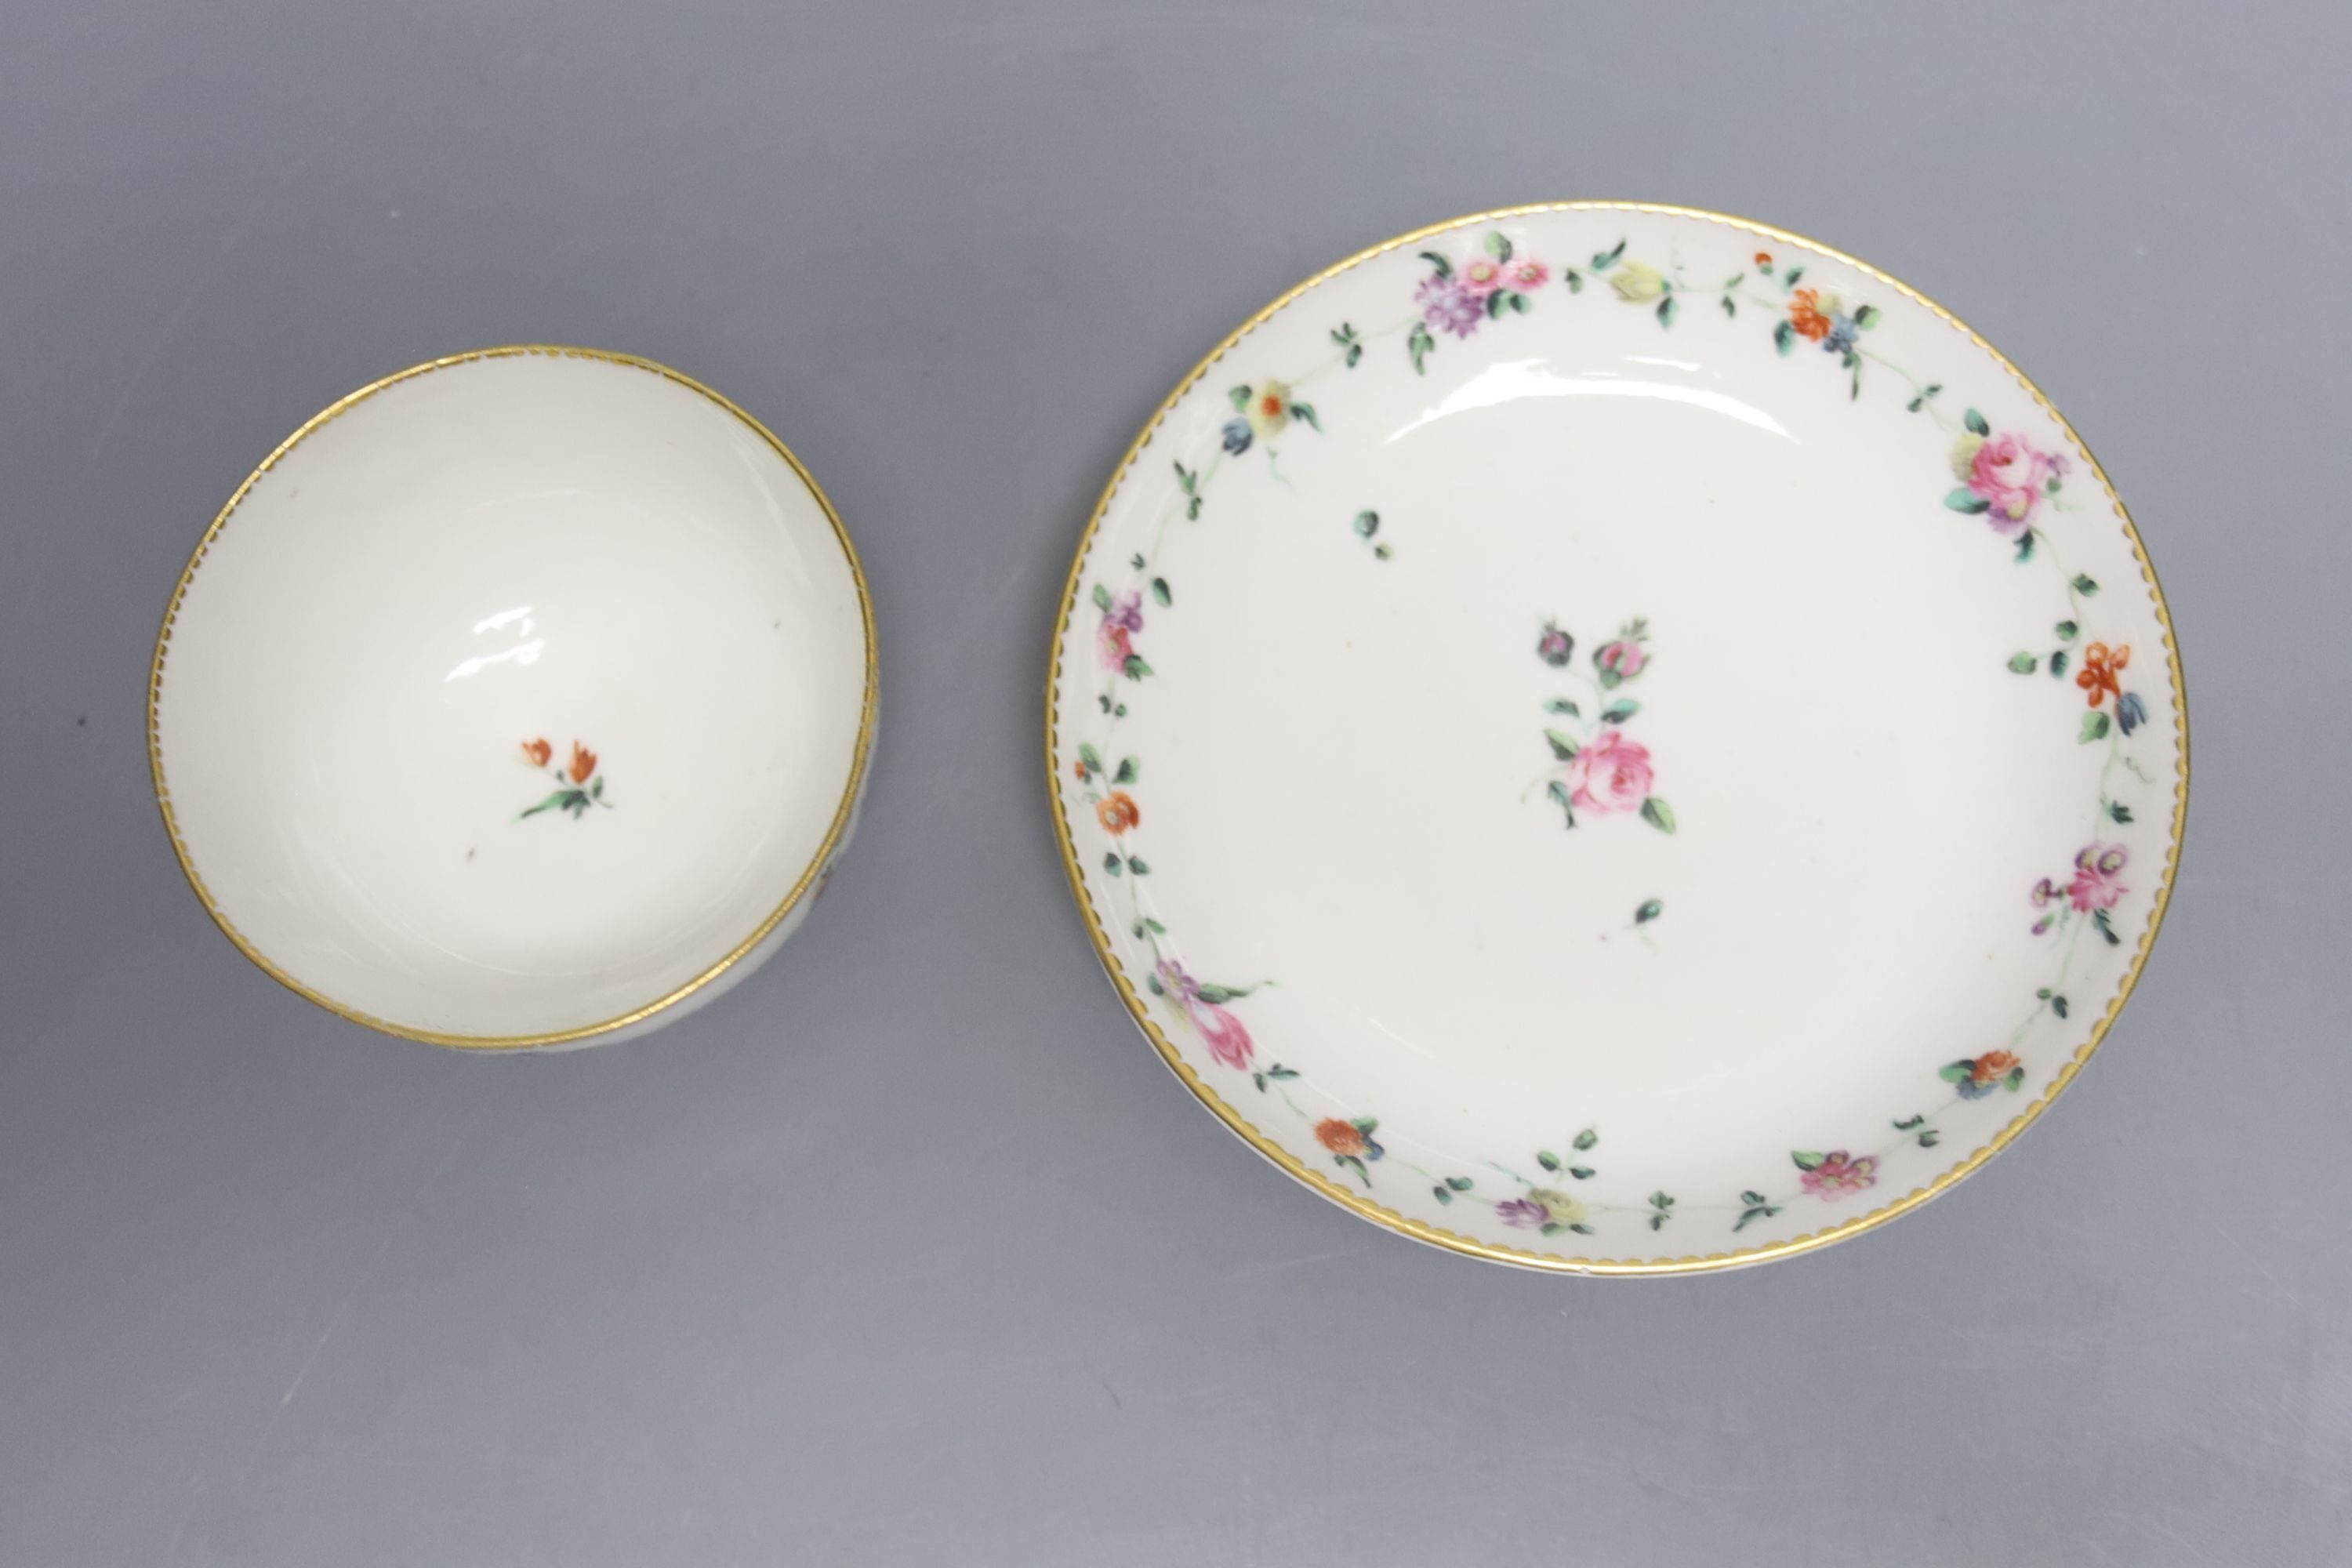 A Chelsea Derby teabowl and saucer painted with chains of flowers, anchor 'D' in gold, label for Alasdair Morrison c. 1775